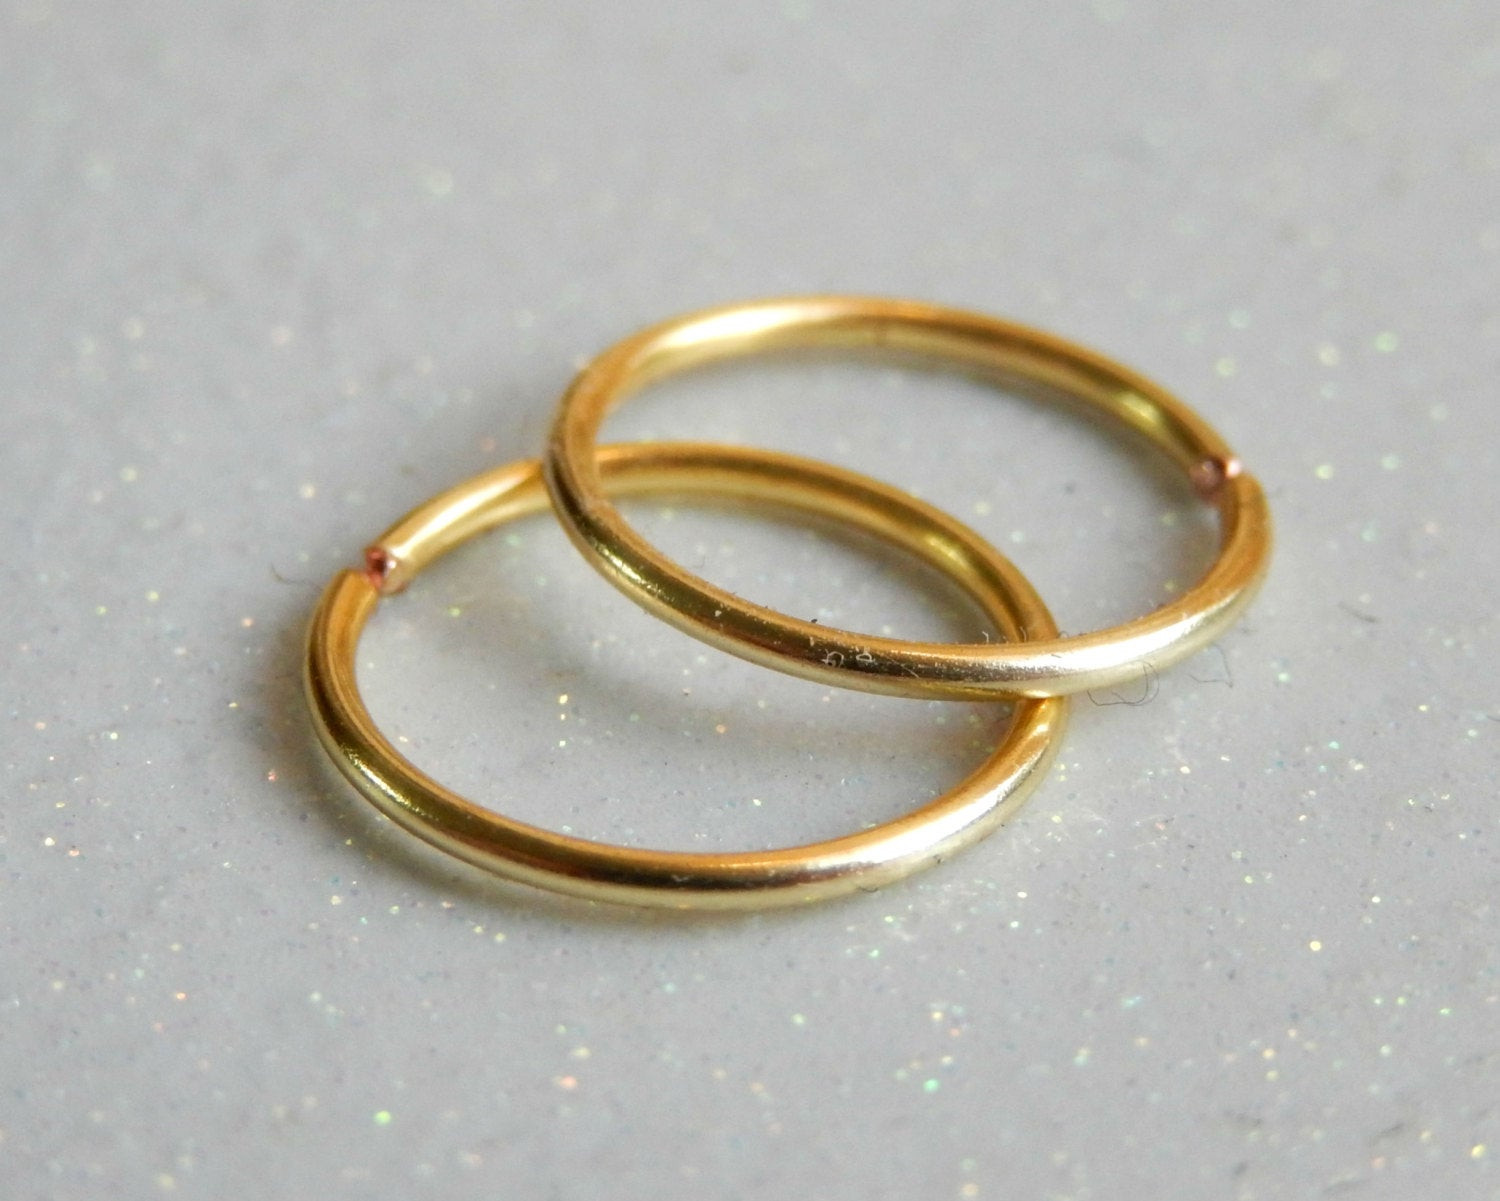 Small Hoop Earrings For Cartilage
 Small Cartilage Hoop Earrings 2 piece gold cartilage helix